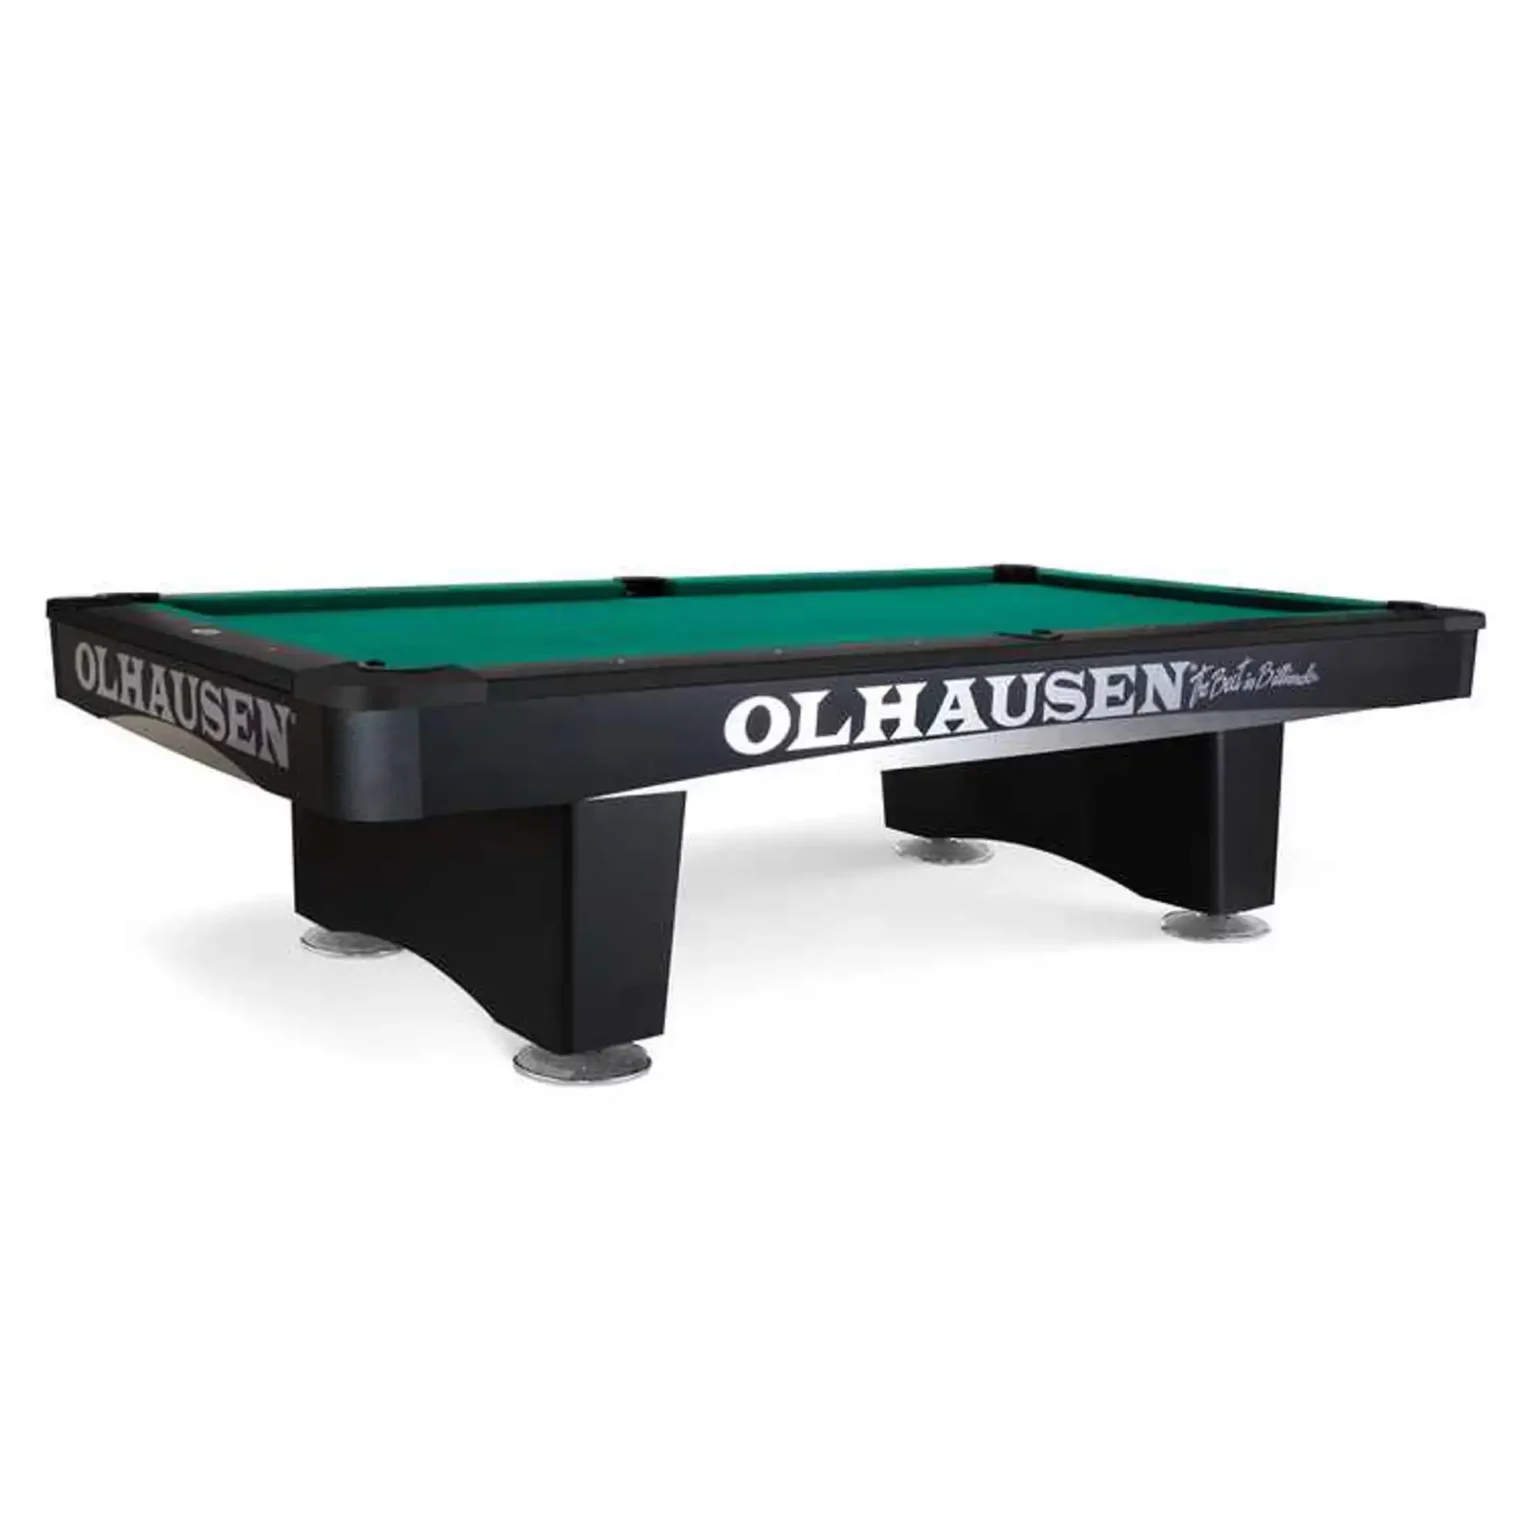 Olhausen Grand Champion pool table